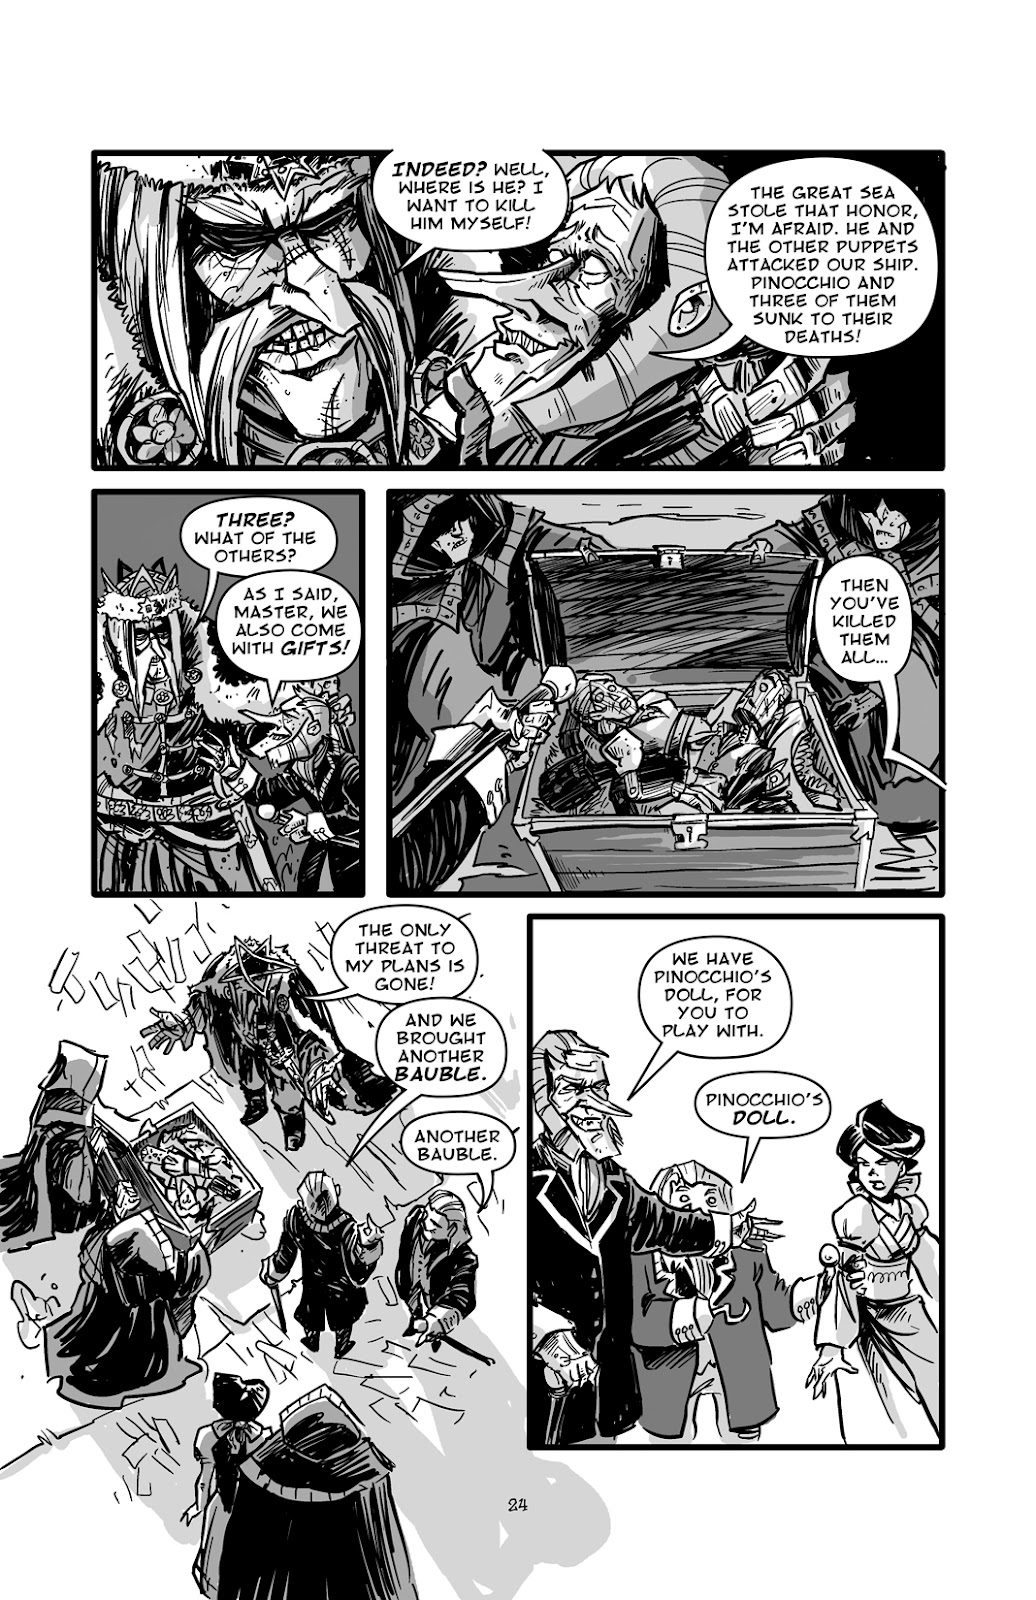 Pinocchio: Vampire Slayer - Of Wood and Blood issue 1 - Page 25